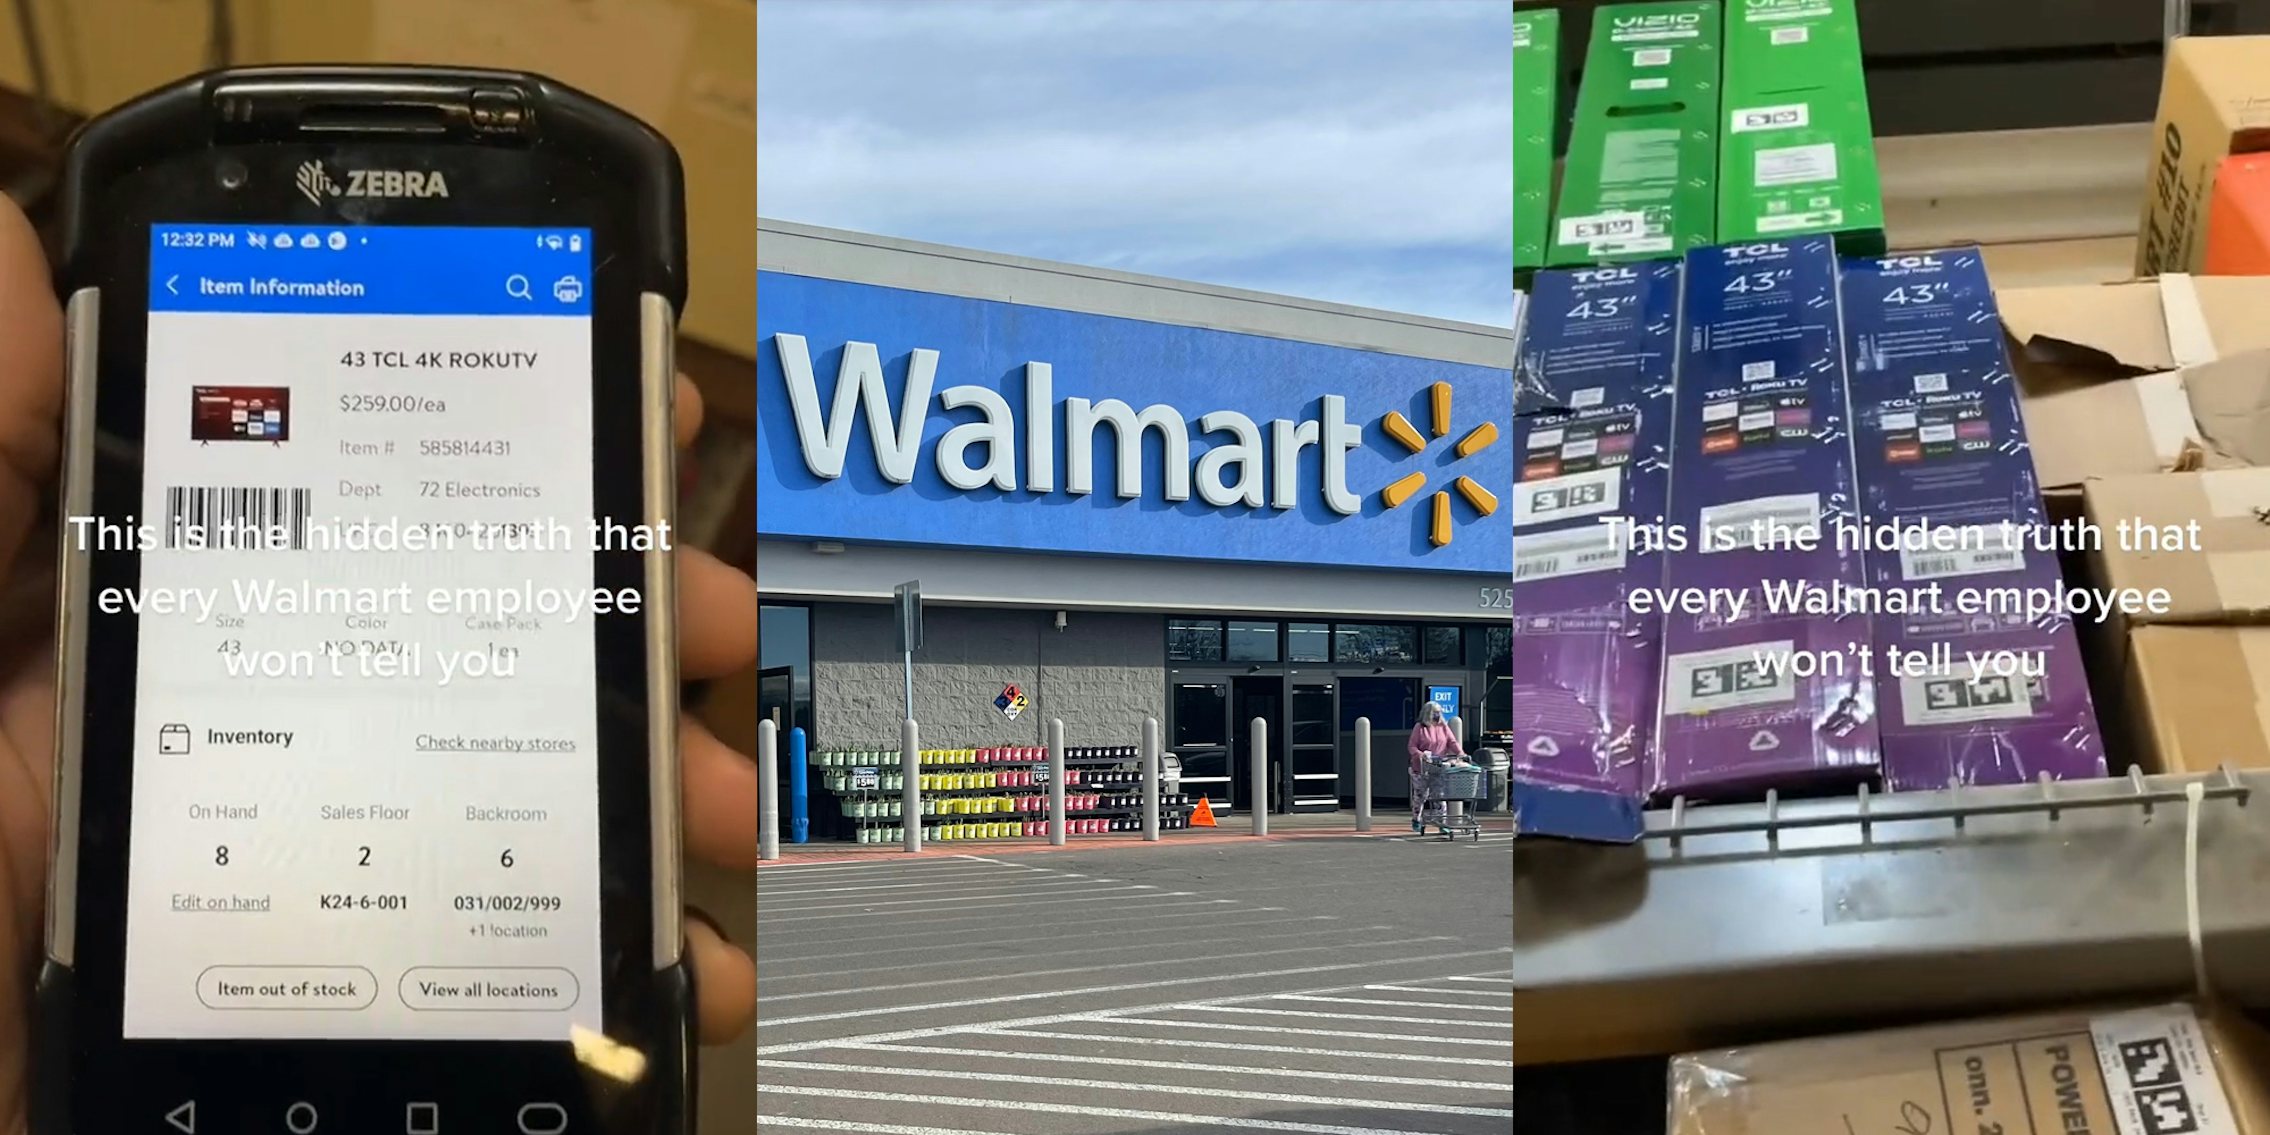 Zebra scanner in Walmart employee's hand with caption 'This is the hidden truth that every Walmart employee won't tell you' (l) Walmart entrance with sign (c) Walmart TVs stacked high on shelf with caption 'This is the hidden truth that every Walmart employee won't tell you' (r)